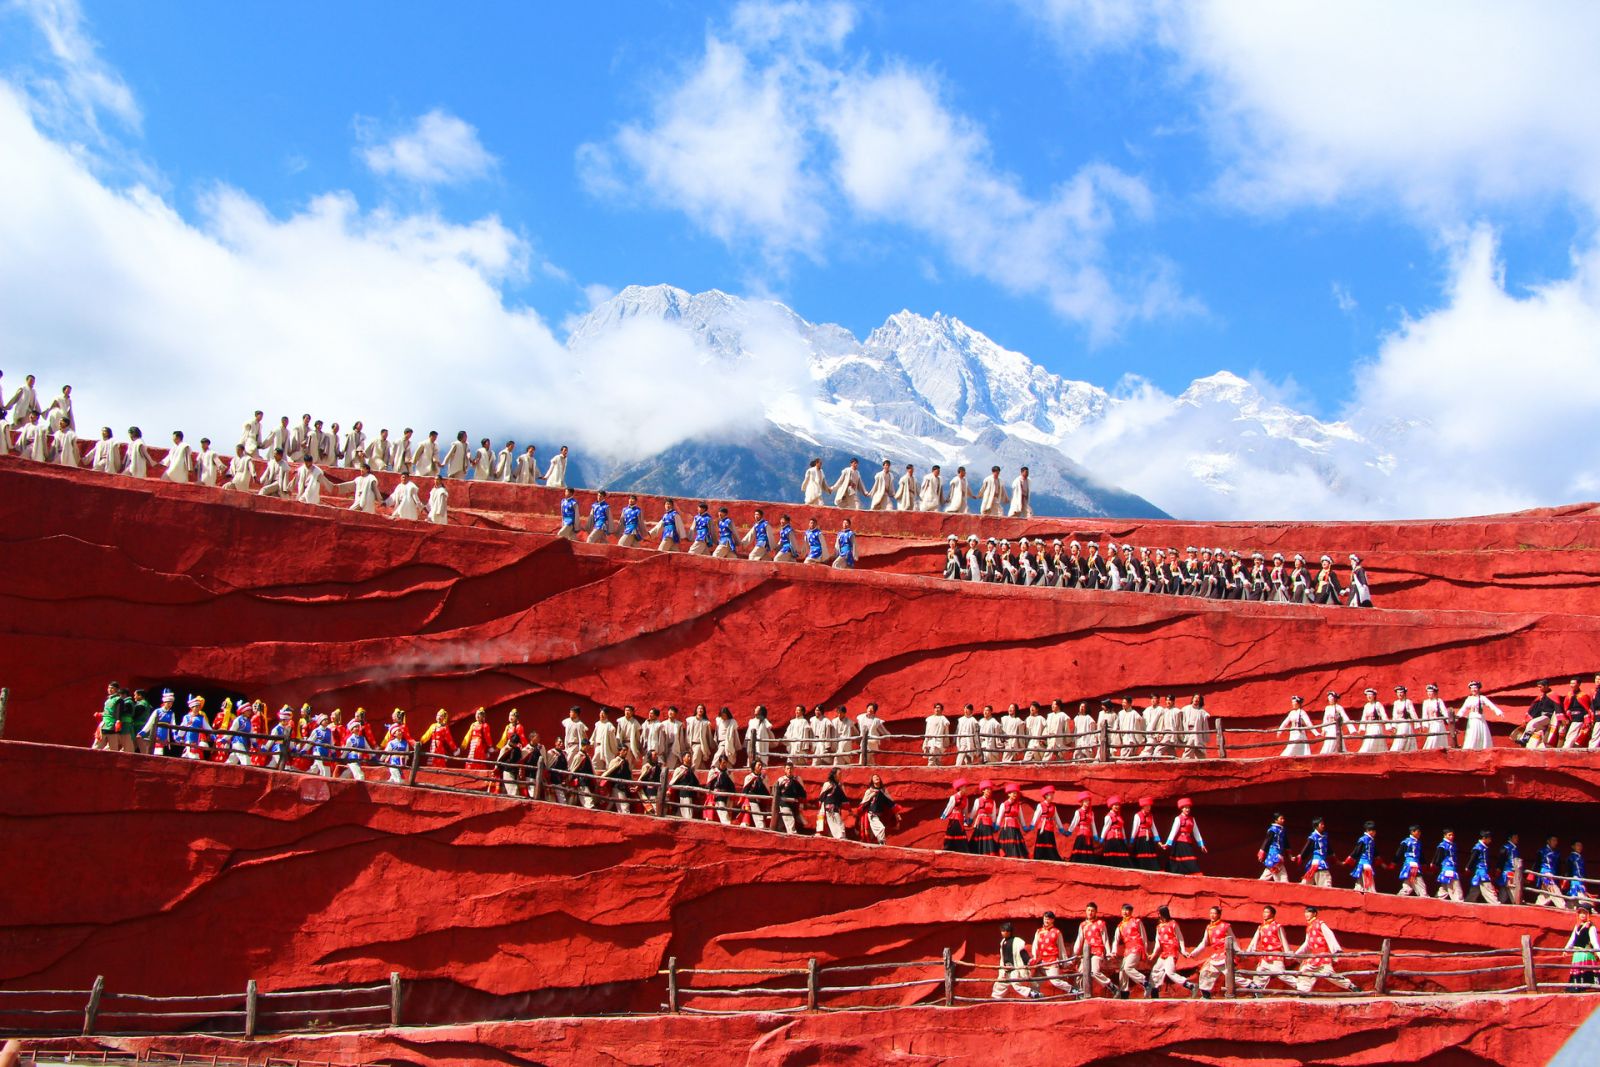 Open-air on the Show Snow Mountain, Impression Lijiang